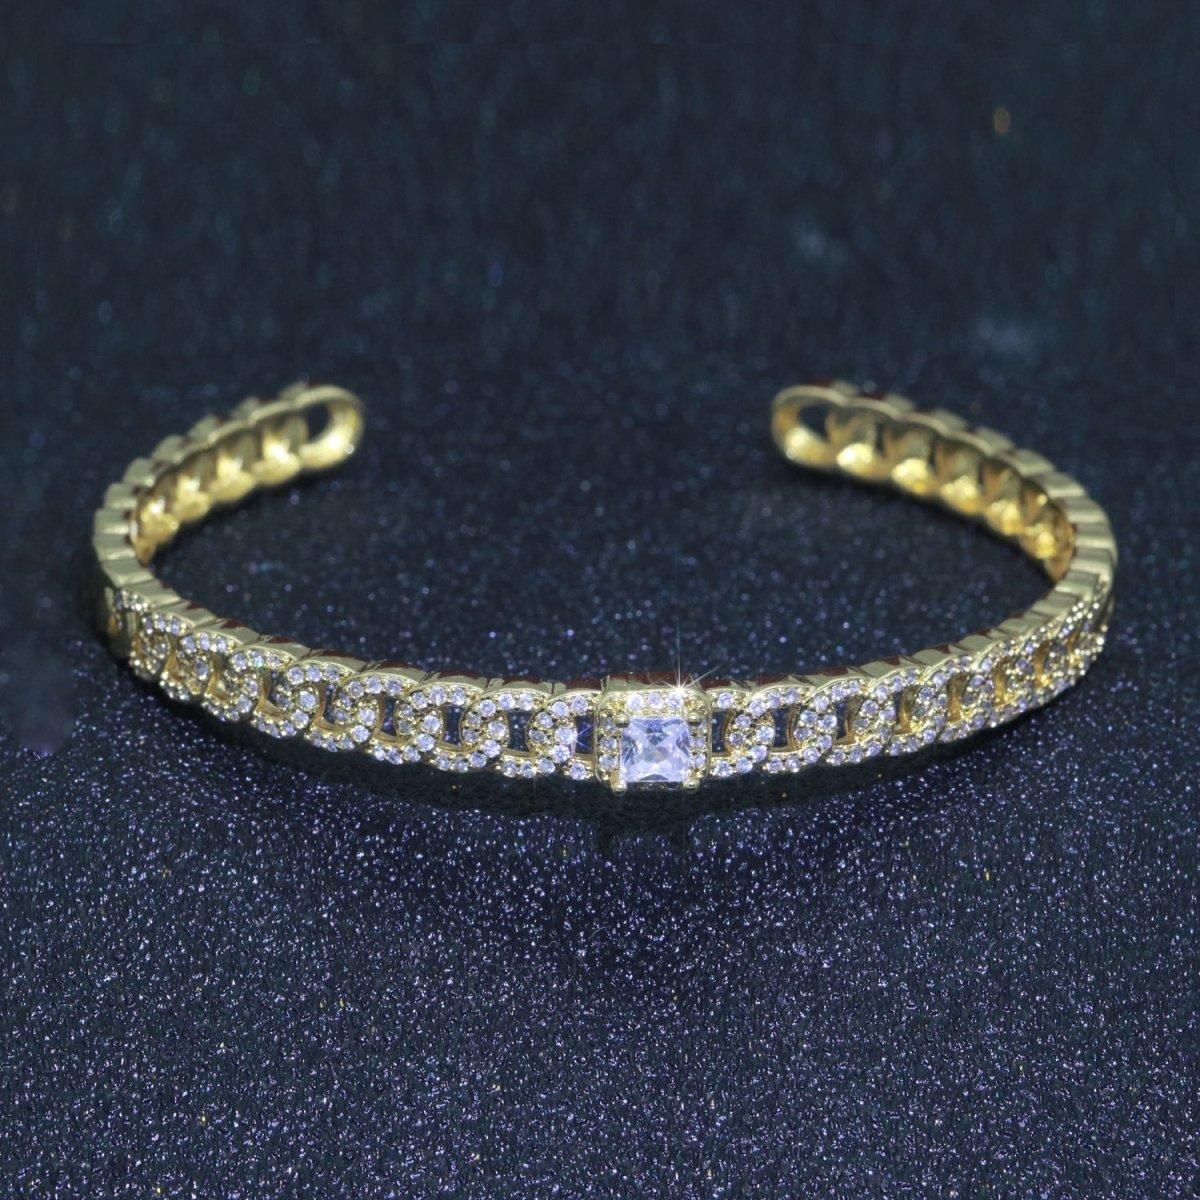 24K Gold Filled Cuban Curb Chain Bracelet With CZ Stones Wholesale Open Adjustable Bangle Fashion Jewelry | WA-072 Clearance Pricing - DLUXCA